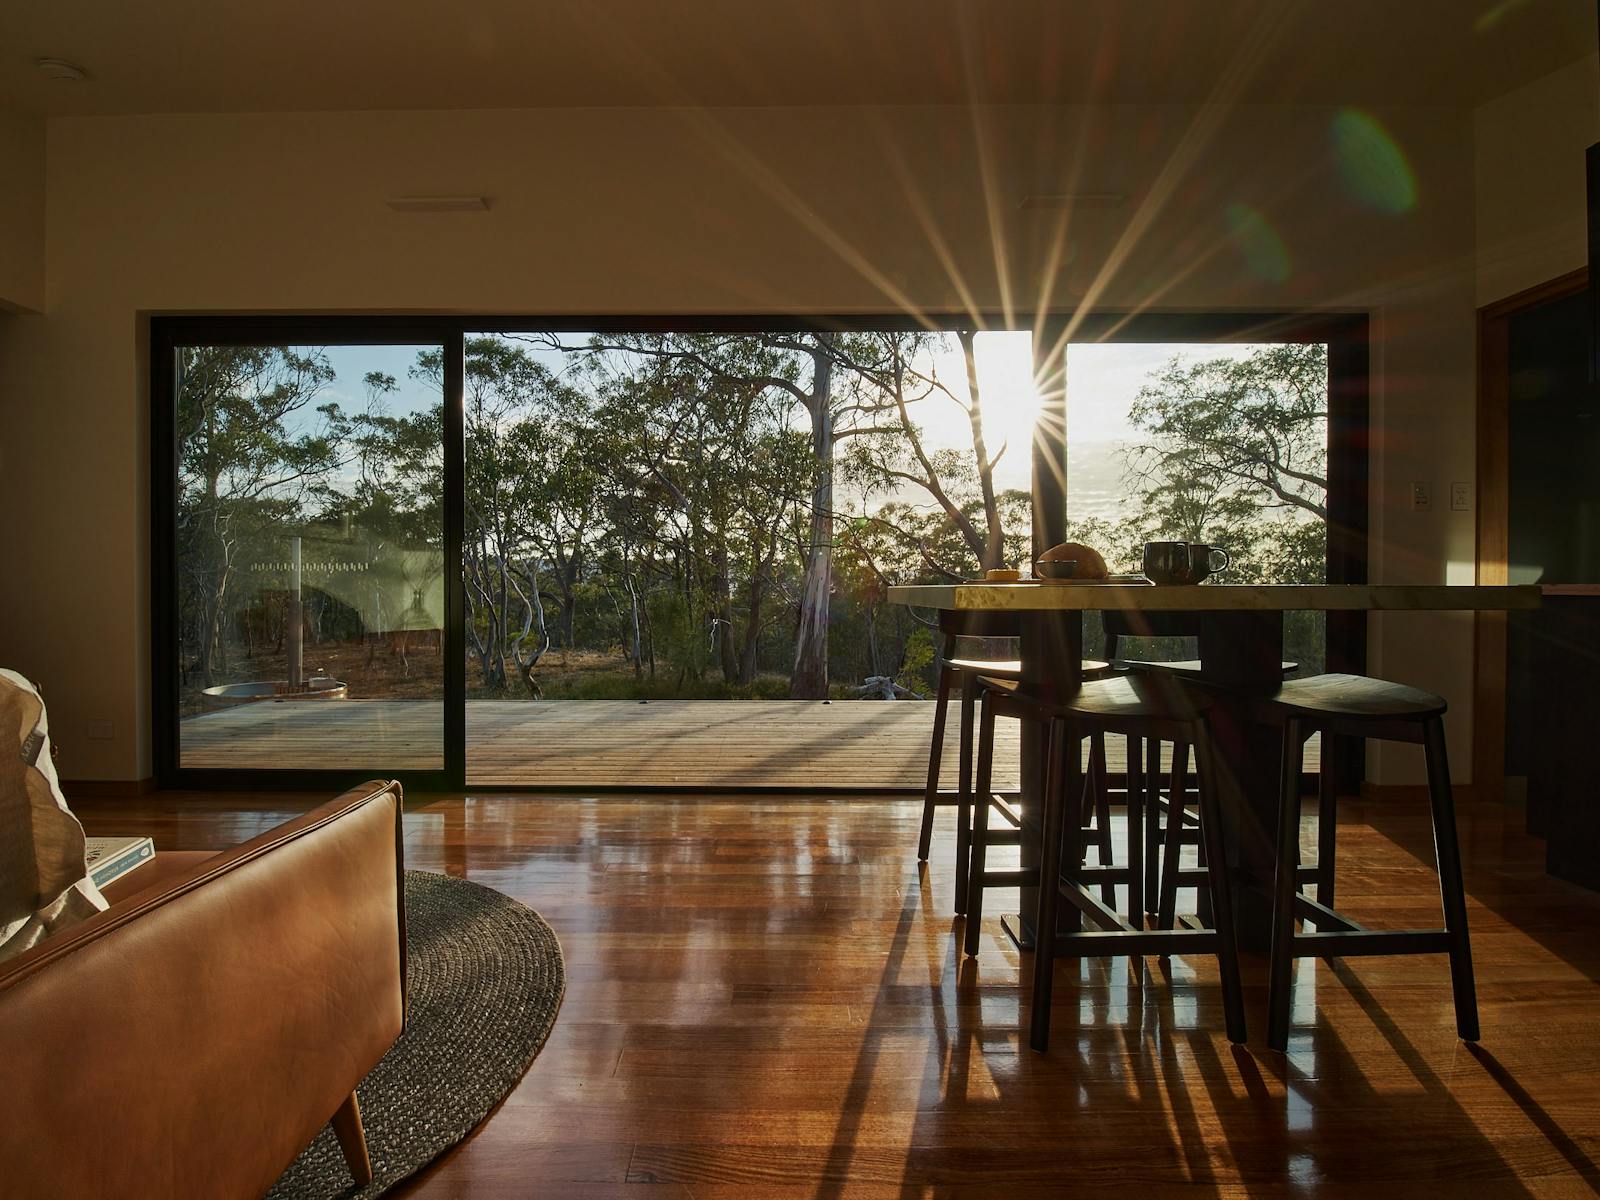 Interior room looking out on the bush with sun shining through full glass frontage